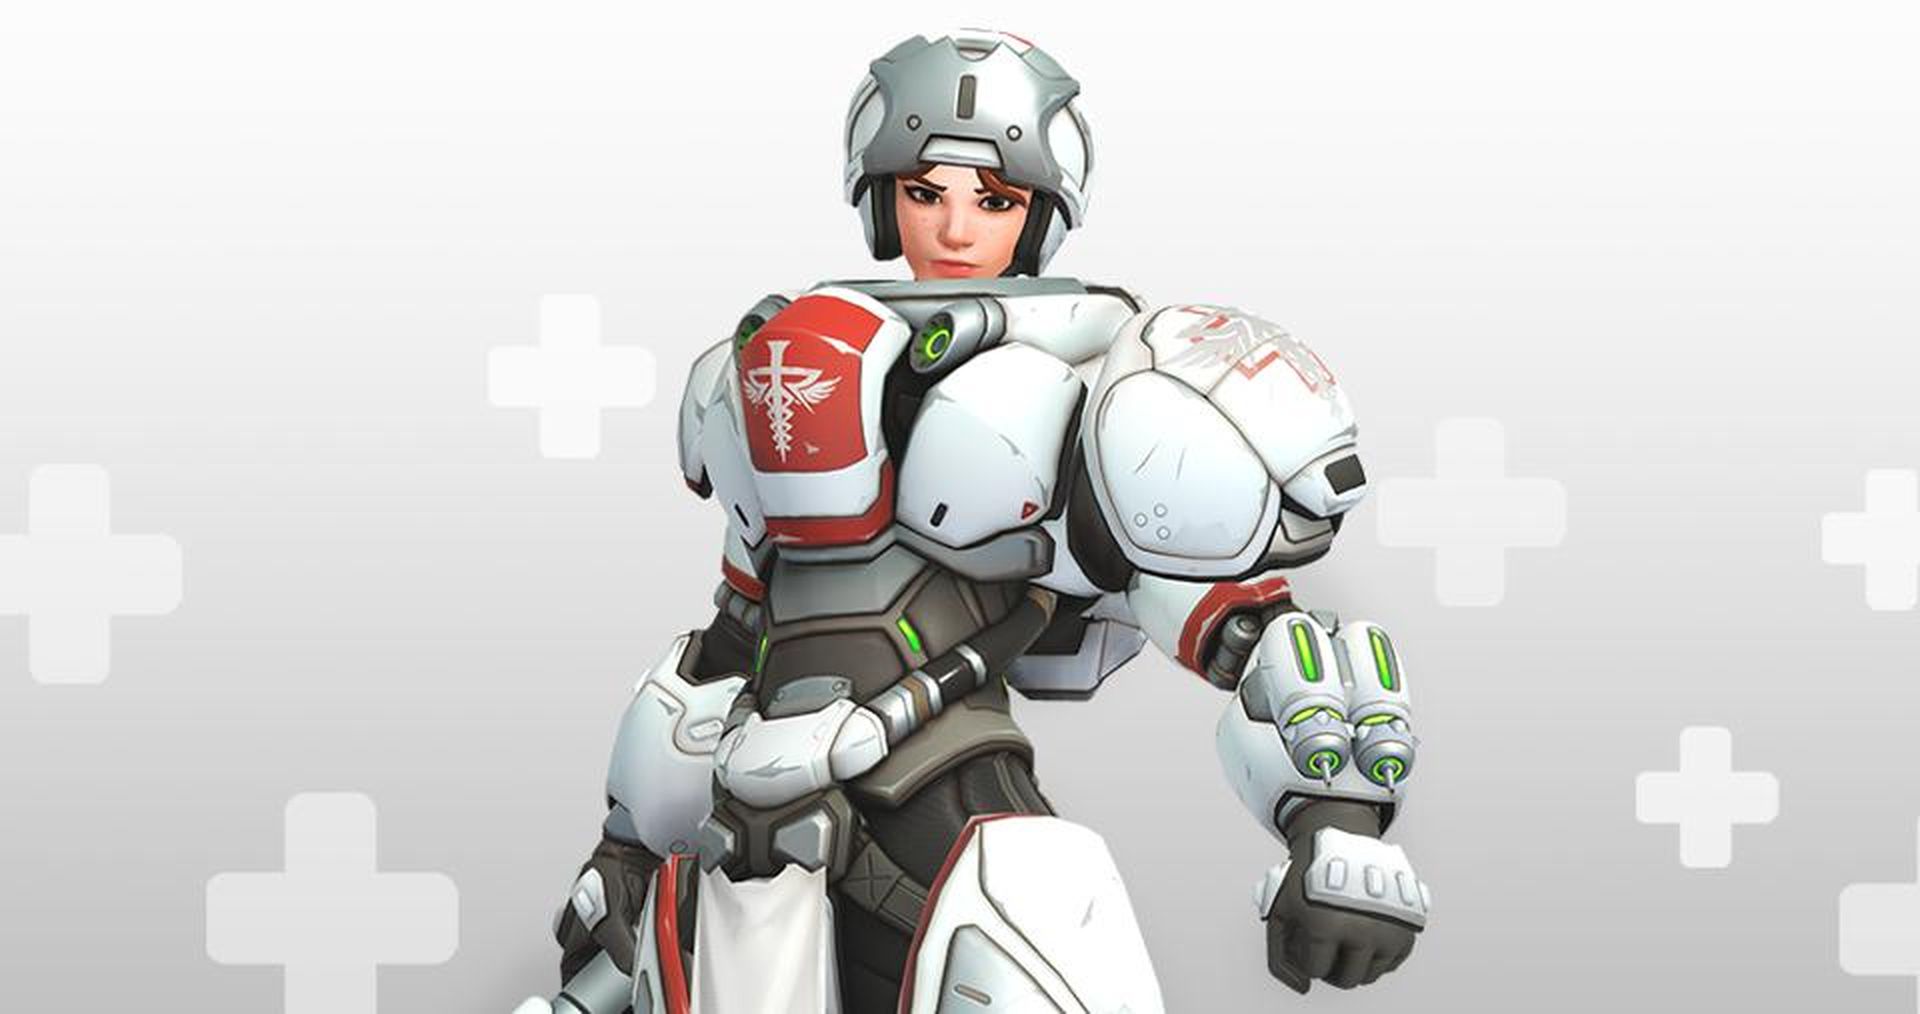 In this article, we are going to go over the Overwatch Support a Streamer event that will give out a free skin and how to take part in it.